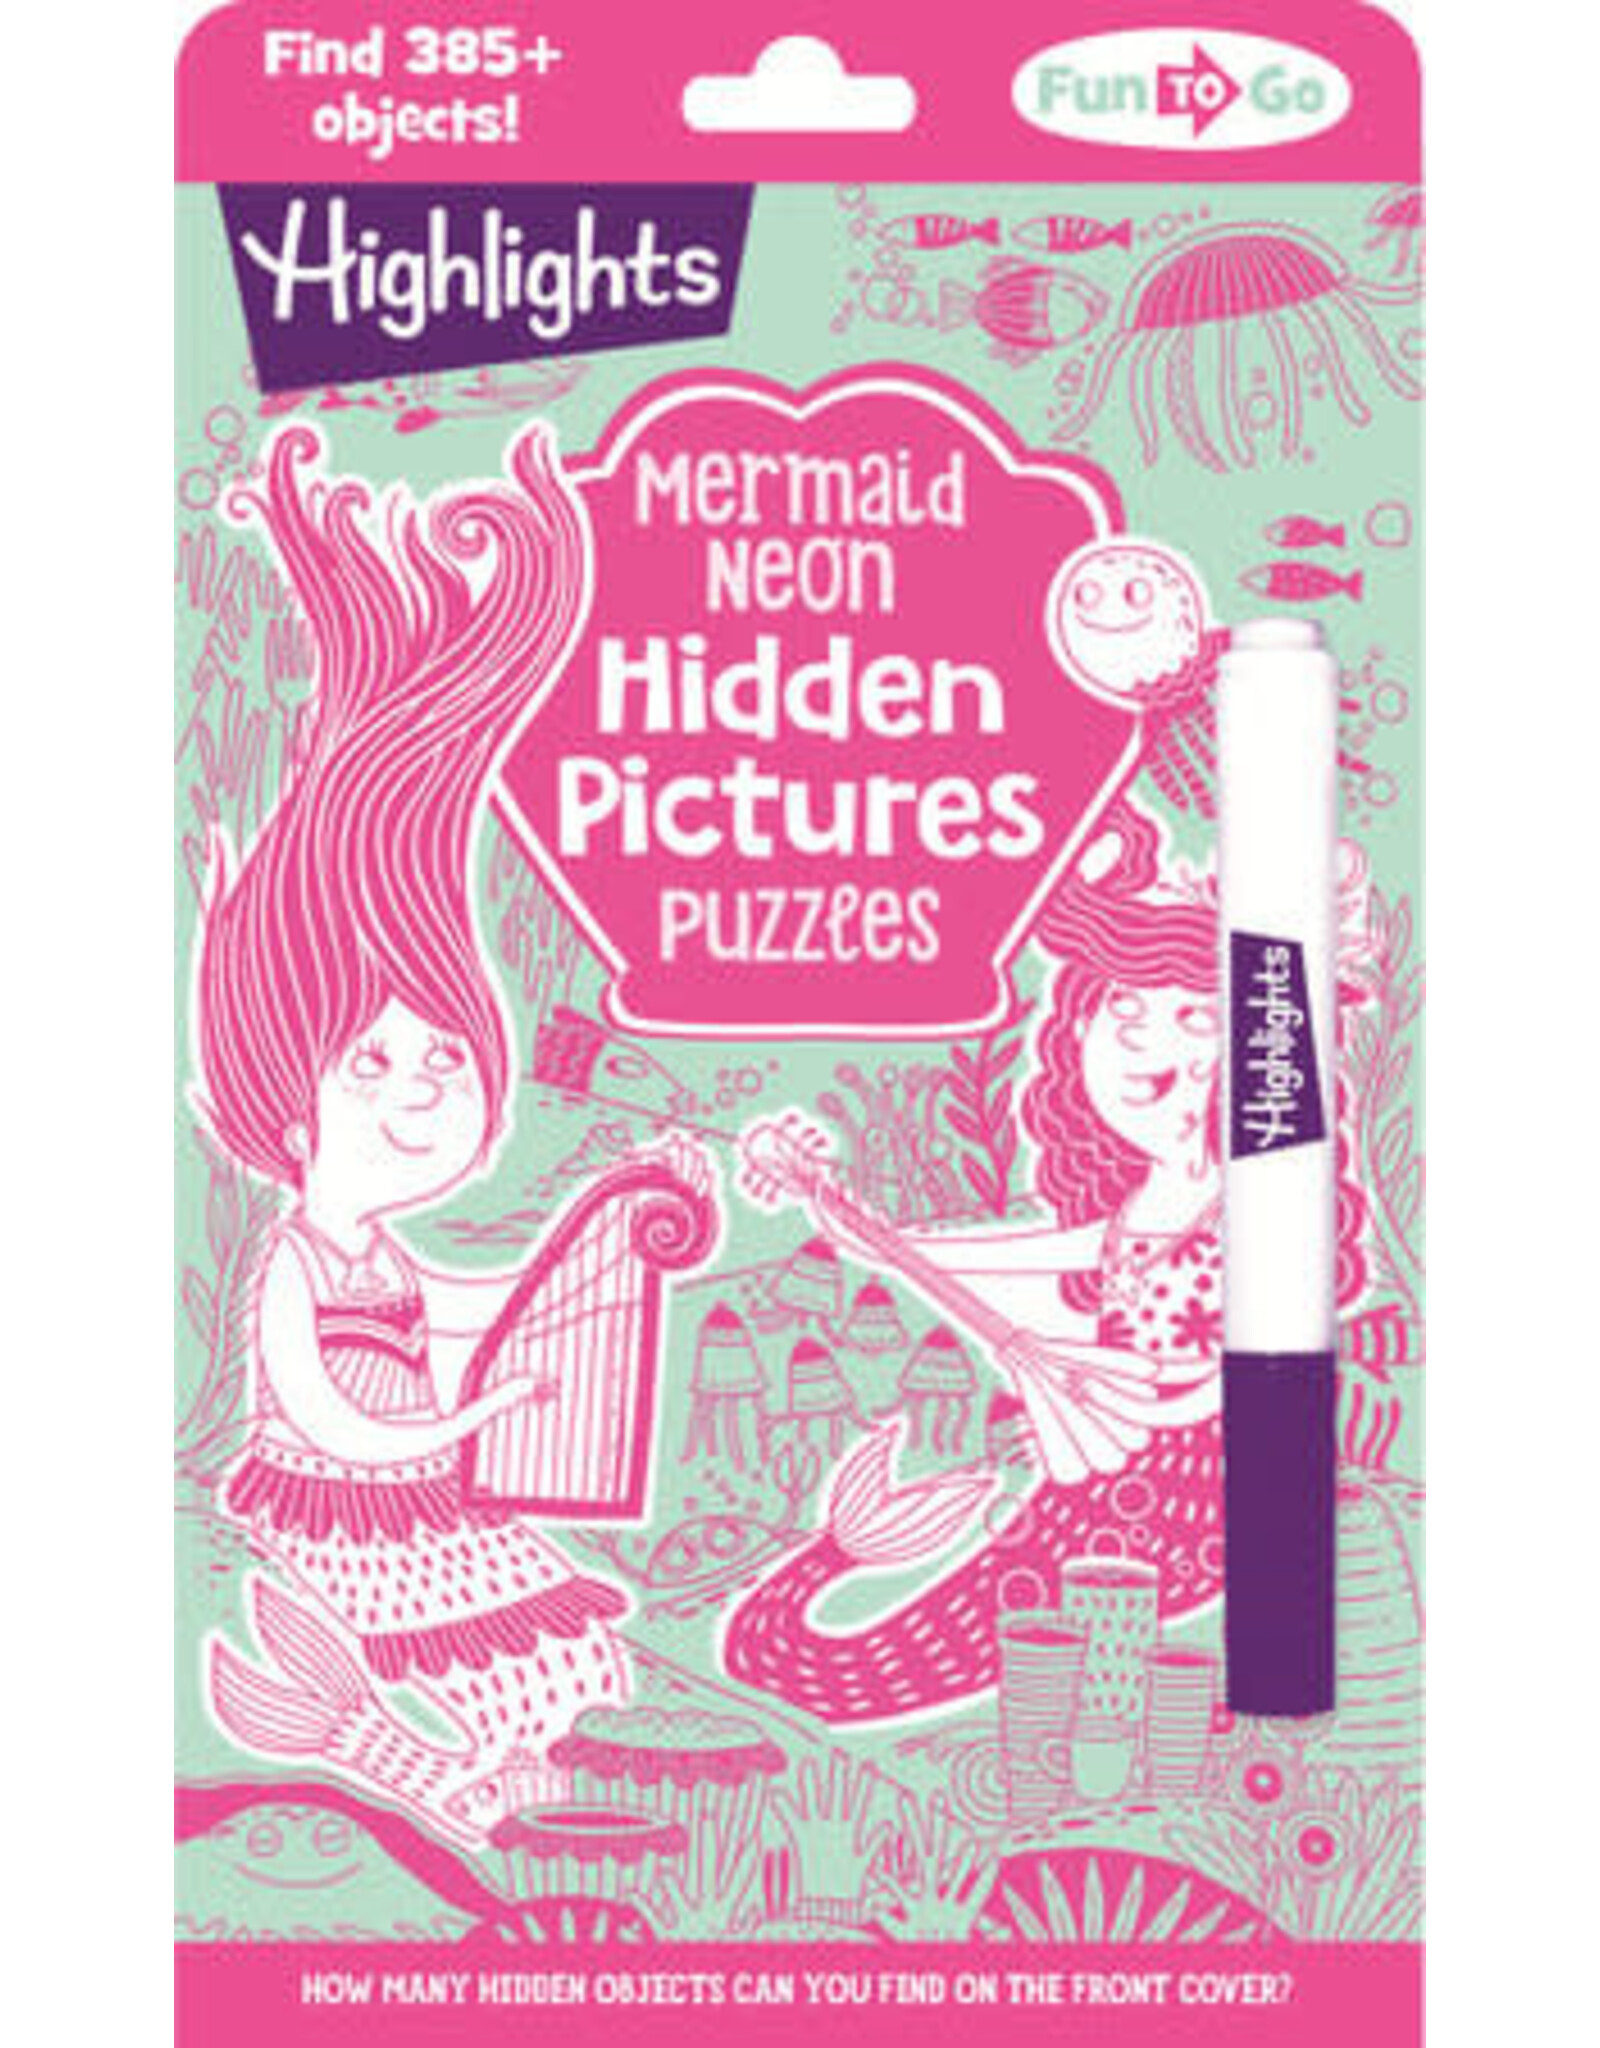 Highlights Highlights Mermaid Neon Hidden Pictures Puzzles